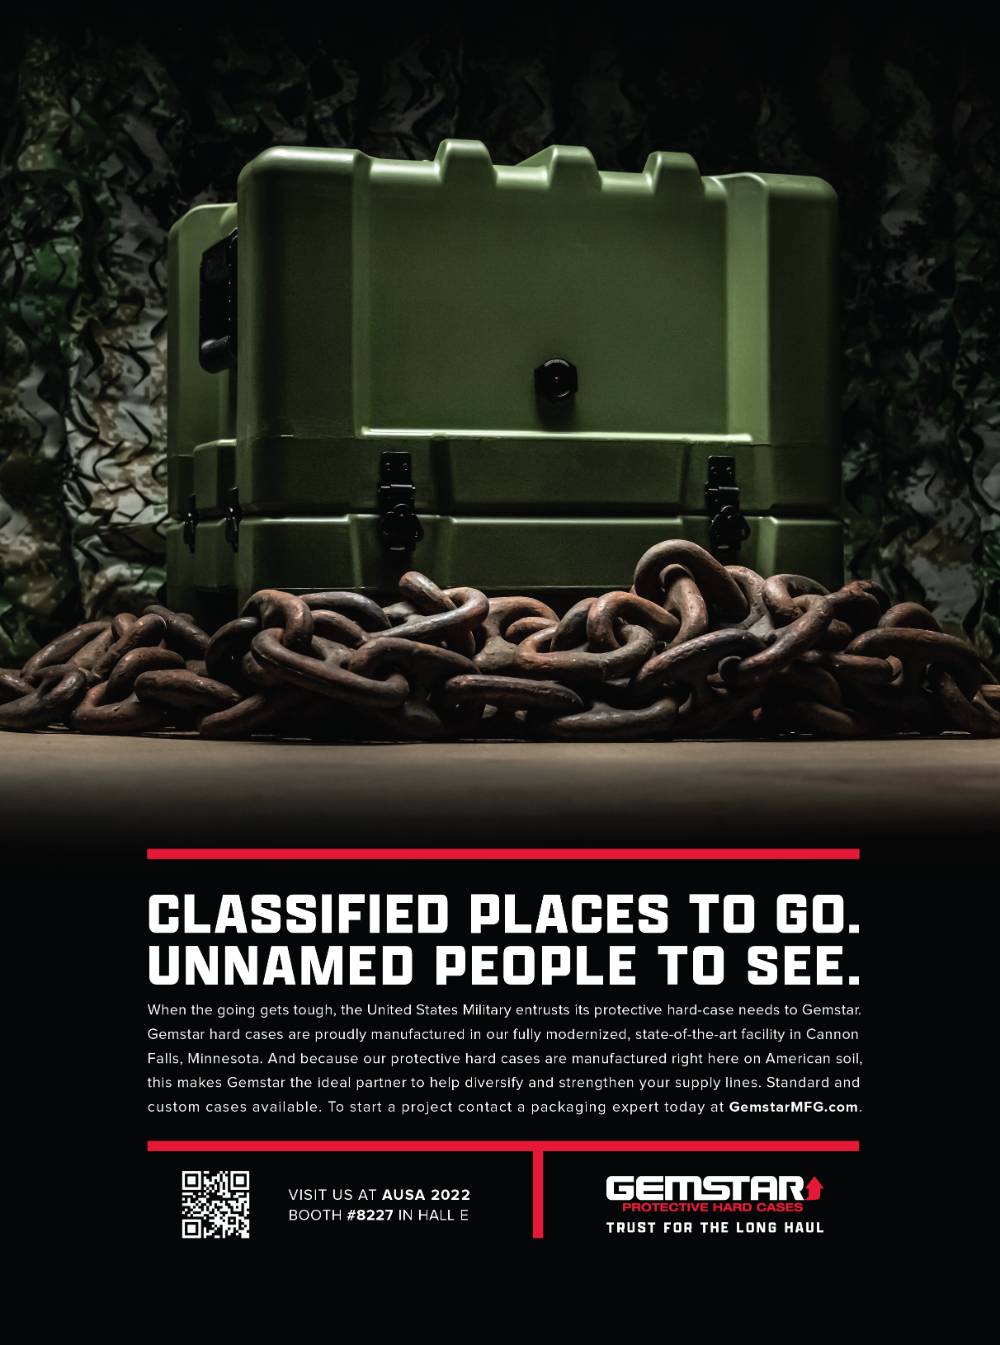 Classified Places To Go Campaign.